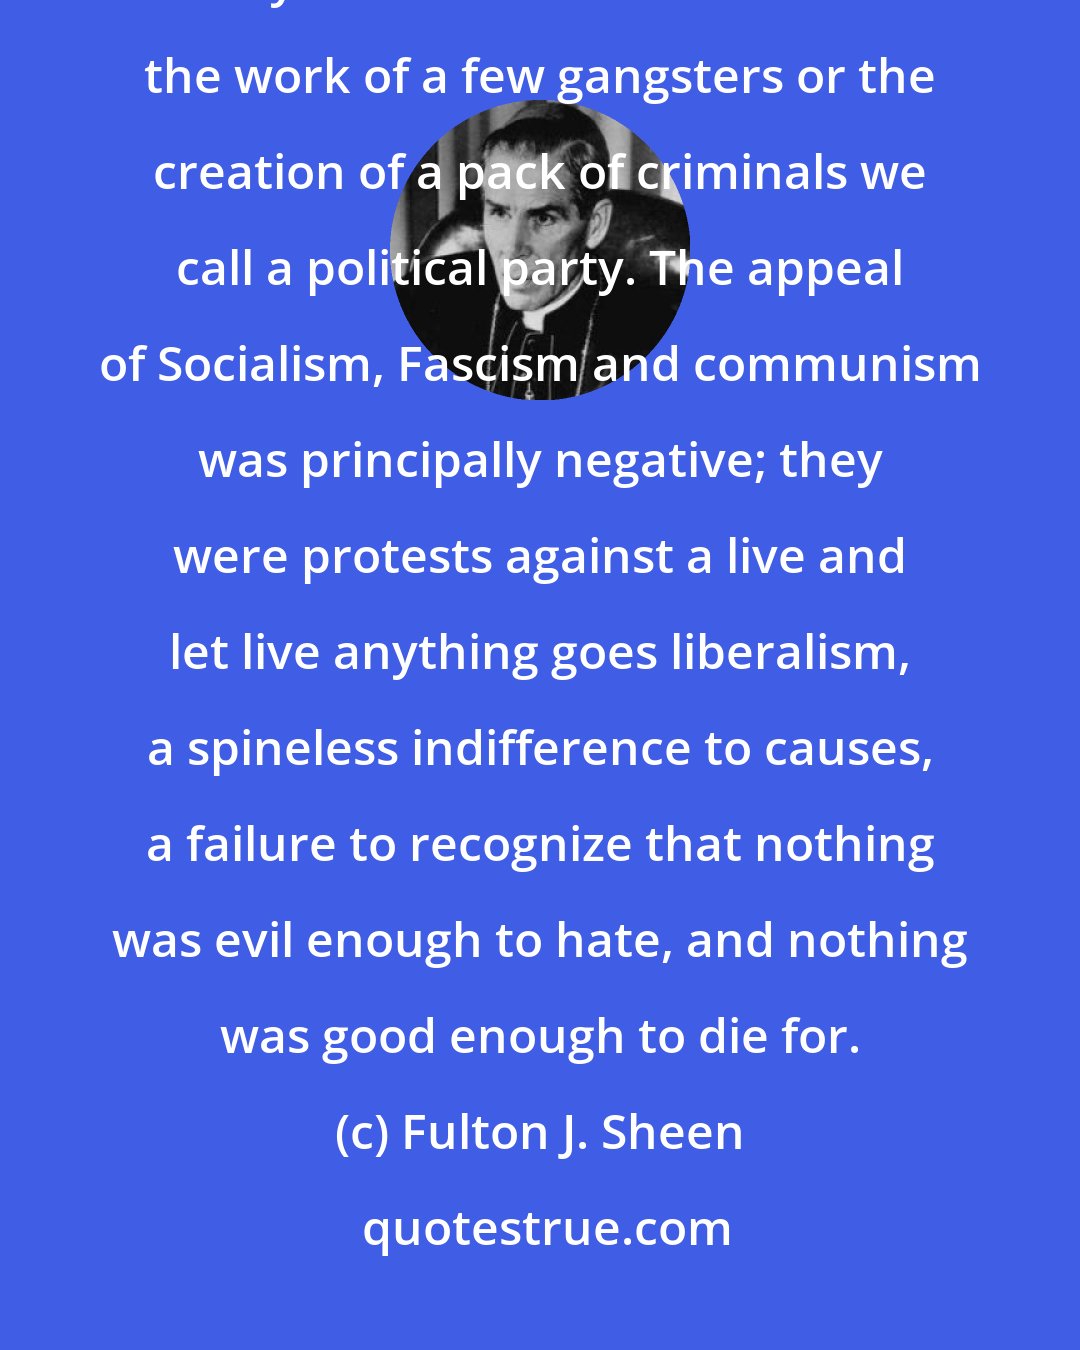 Fulton J. Sheen: Never will we be able to understand our times if we naively 'think' of this system of self Government as the work of a few gangsters or the creation of a pack of criminals we call a political party. The appeal of Socialism, Fascism and communism was principally negative; they were protests against a live and let live anything goes liberalism, a spineless indifference to causes, a failure to recognize that nothing was evil enough to hate, and nothing was good enough to die for.